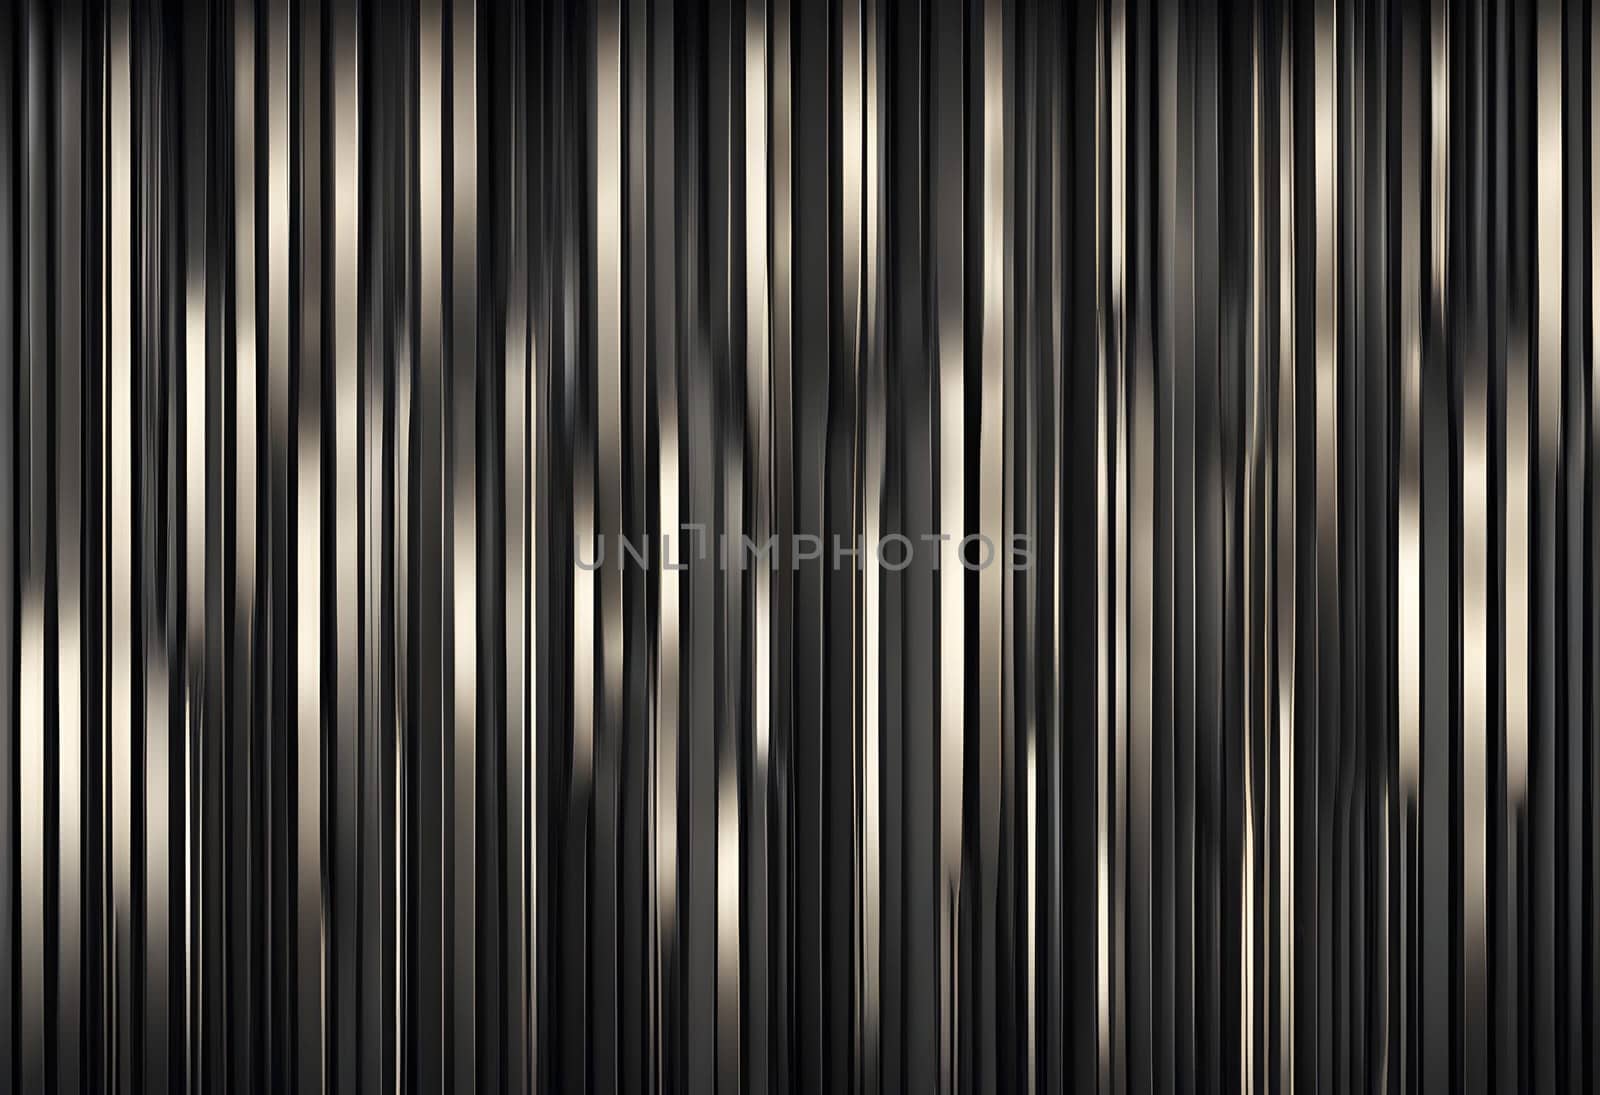 Dark modern style, minimalistic pattern of vertical metallic shiny stripes on black background, editable multipurpose abstract background design in wide range, creative template for web by rostik924